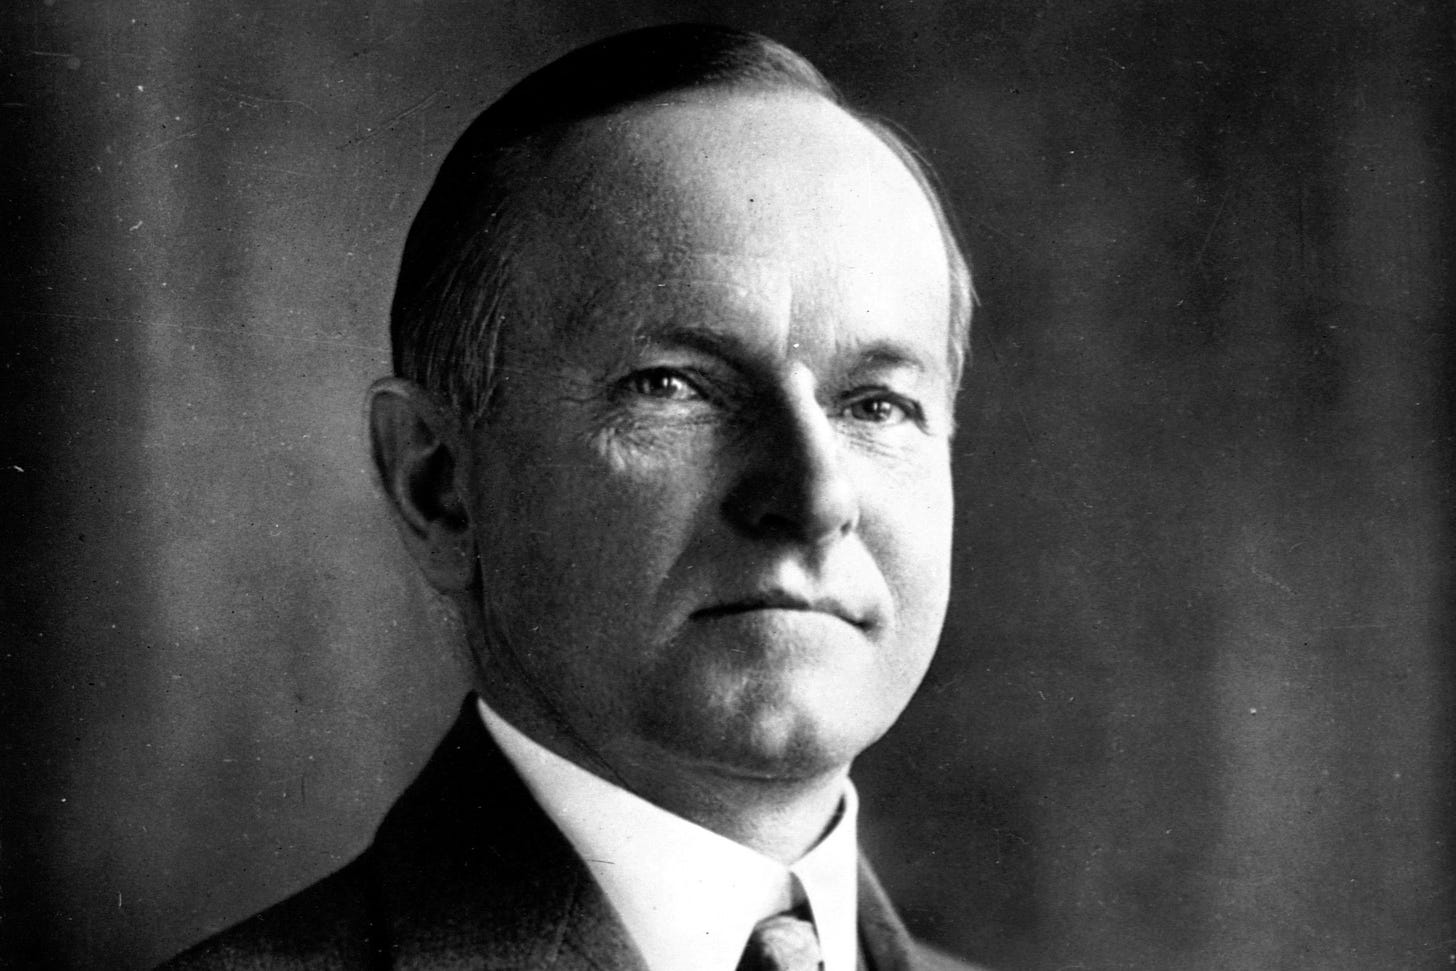 Biography of Calvin Coolidge, the 30th US President